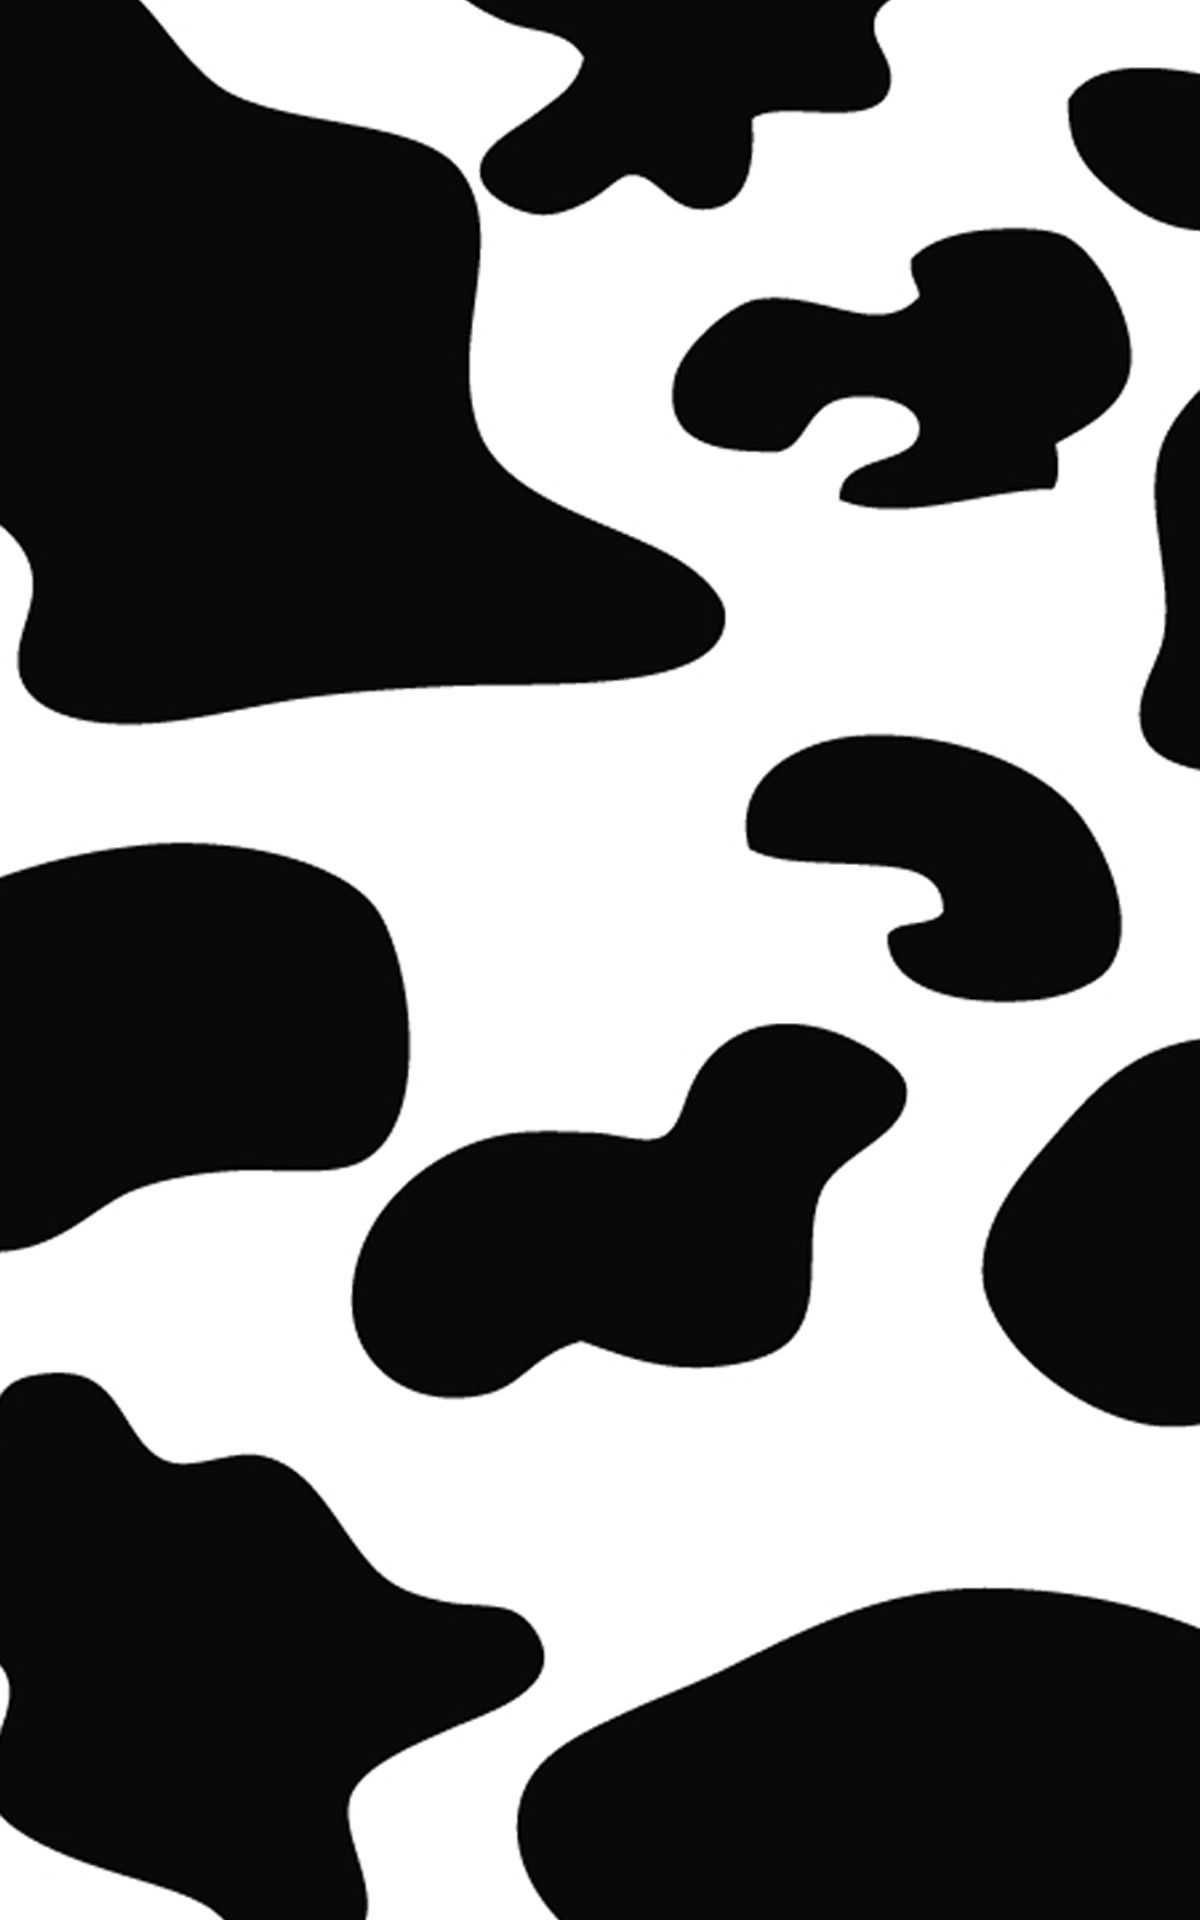 Animal Print Brown Cow Spots Seamless Pattern Dalmatian Dog Pattern  Abstract Background Stock Illustration - Download Image Now - iStock